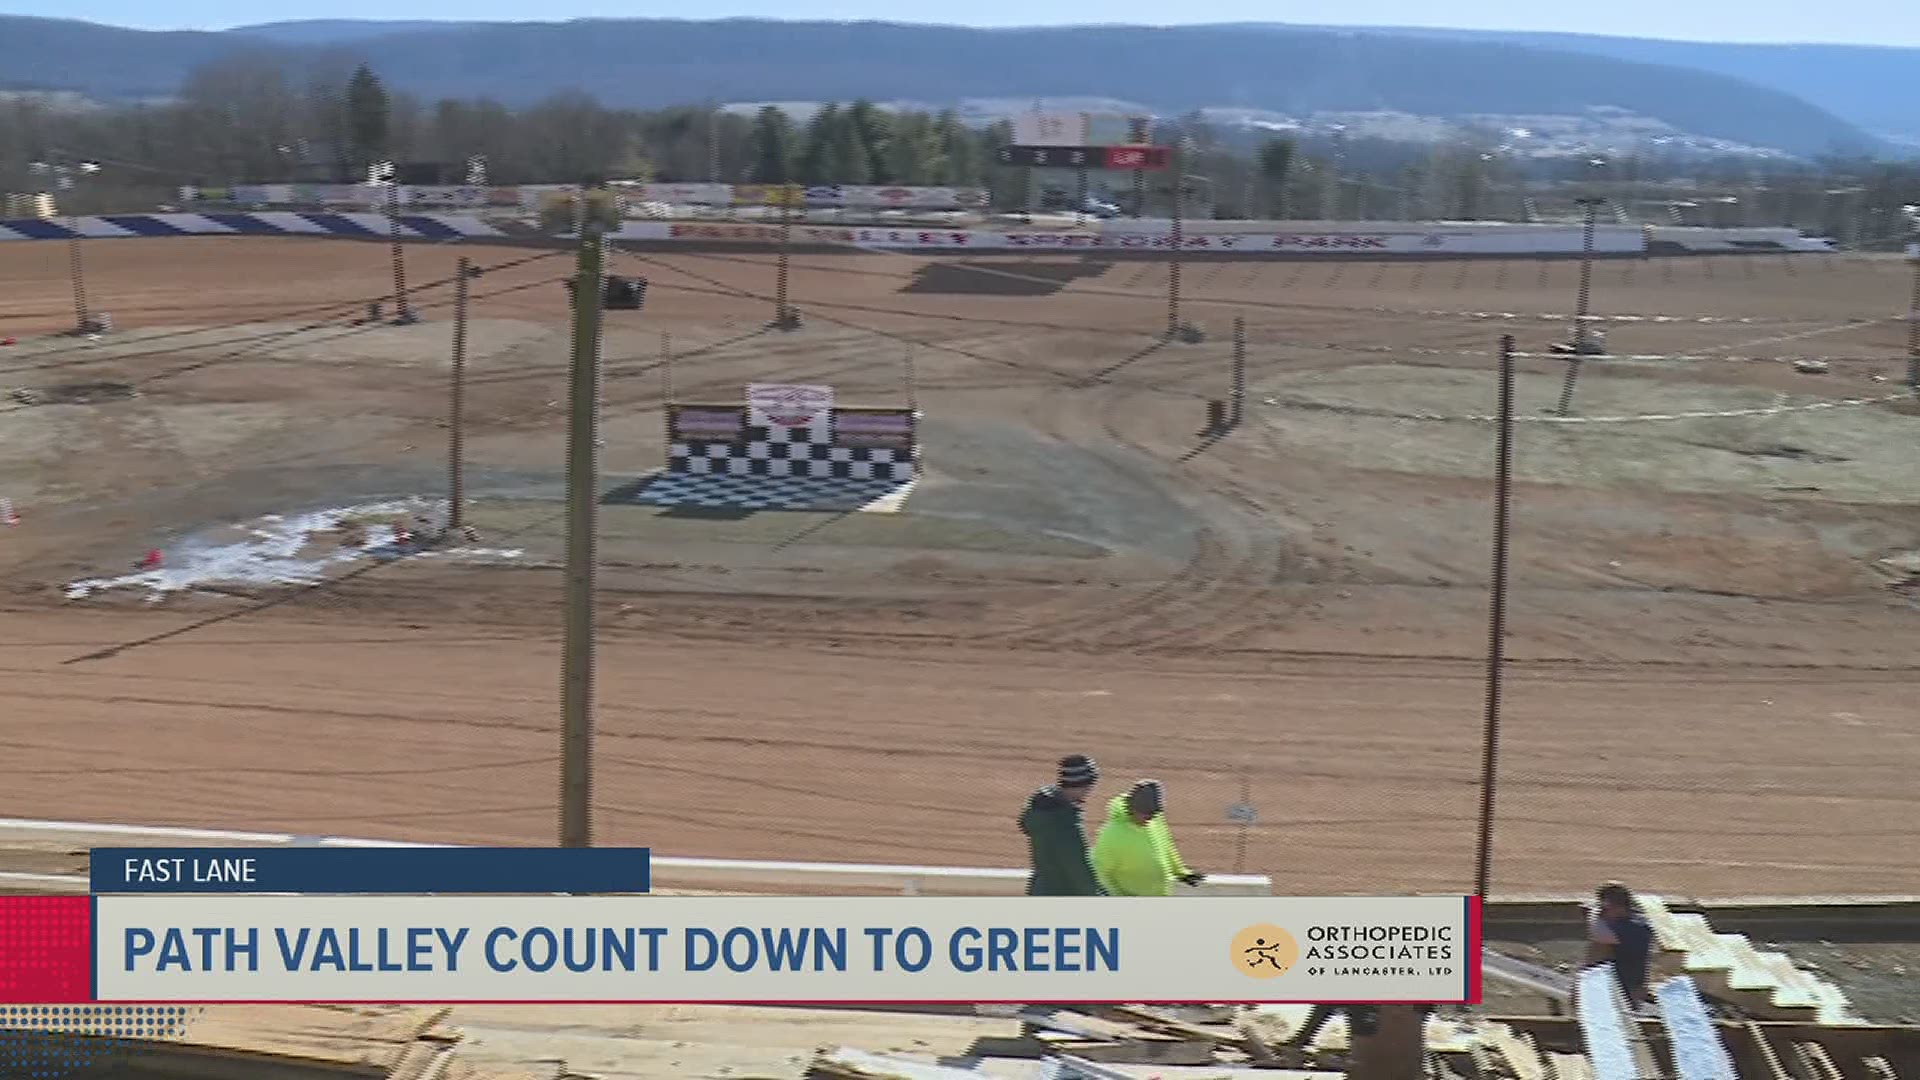 Just a month until the green flag drops at Path Valley.